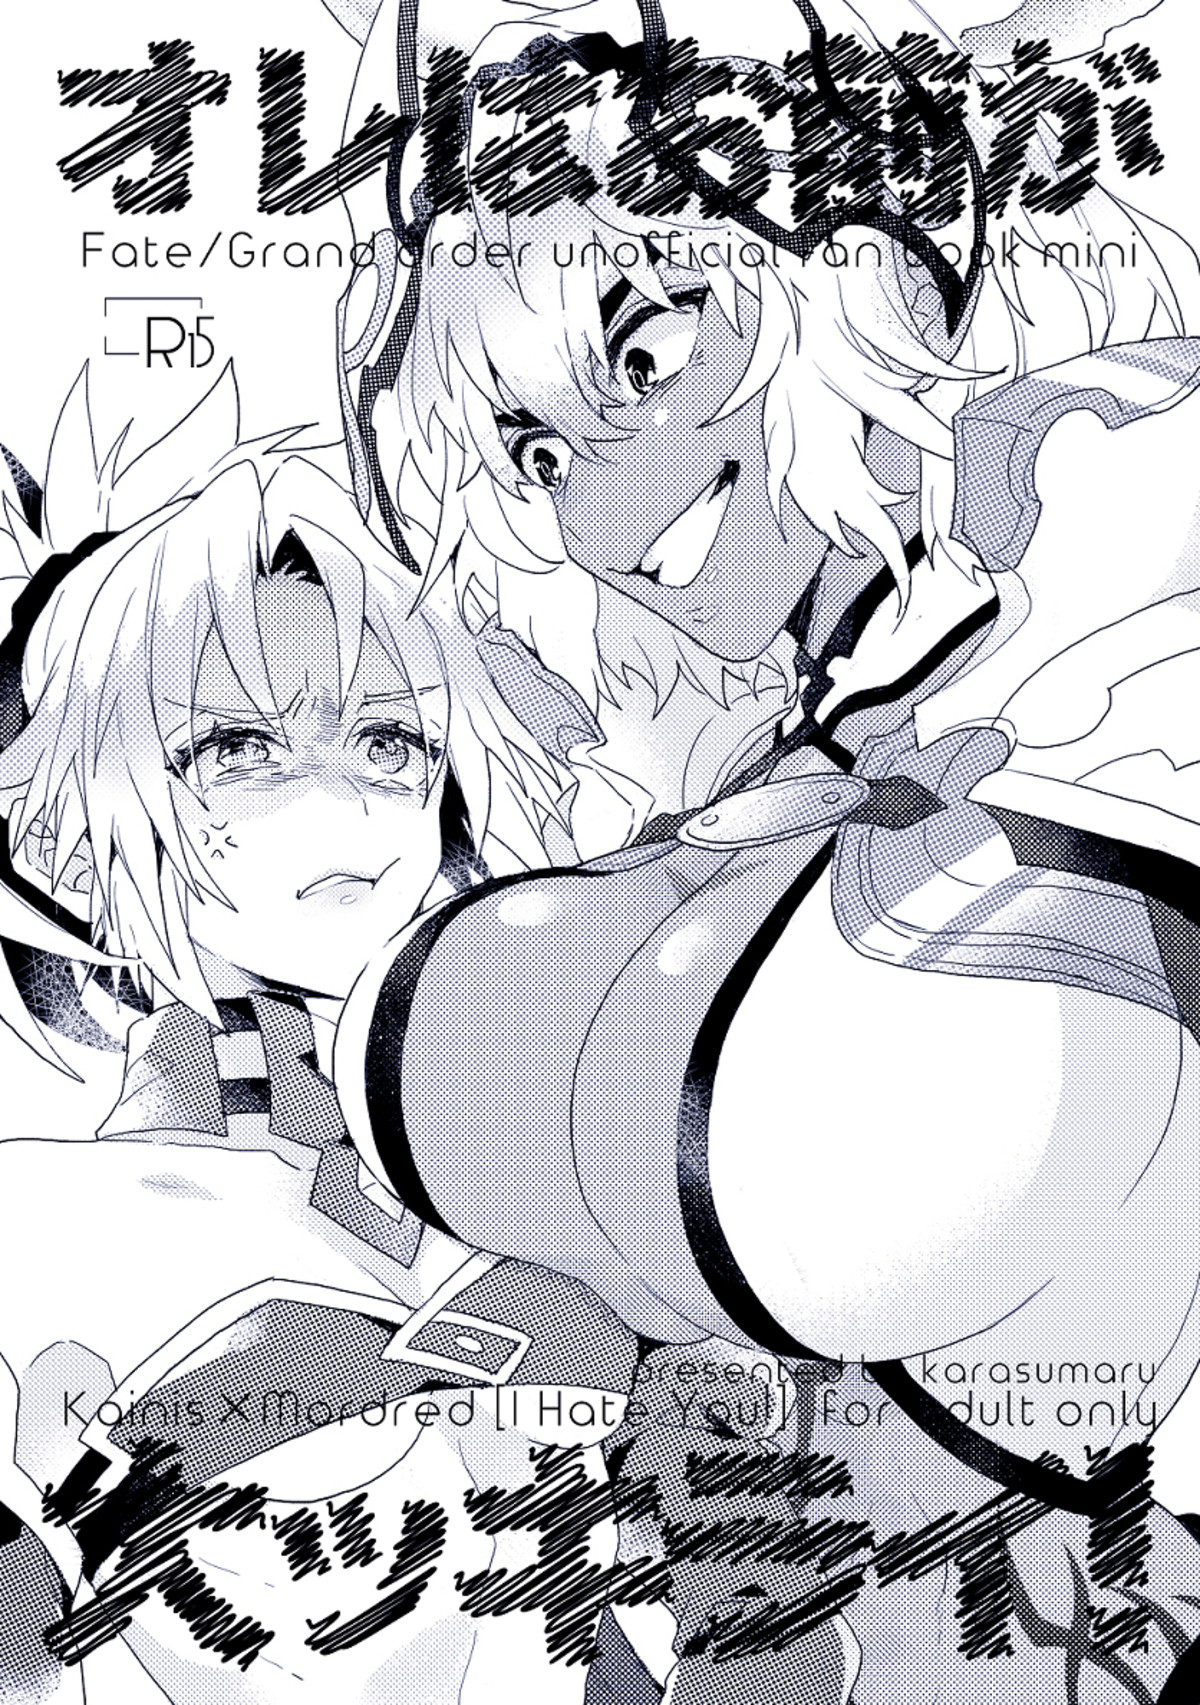 Mordred vs Caenis. Source source=pixiv&amp;utmmedium=promotion&amp;utmcampaign=pixiv-promotion&amp;utmcontent=work-new_items join list: Fate (425 subs)Mention H